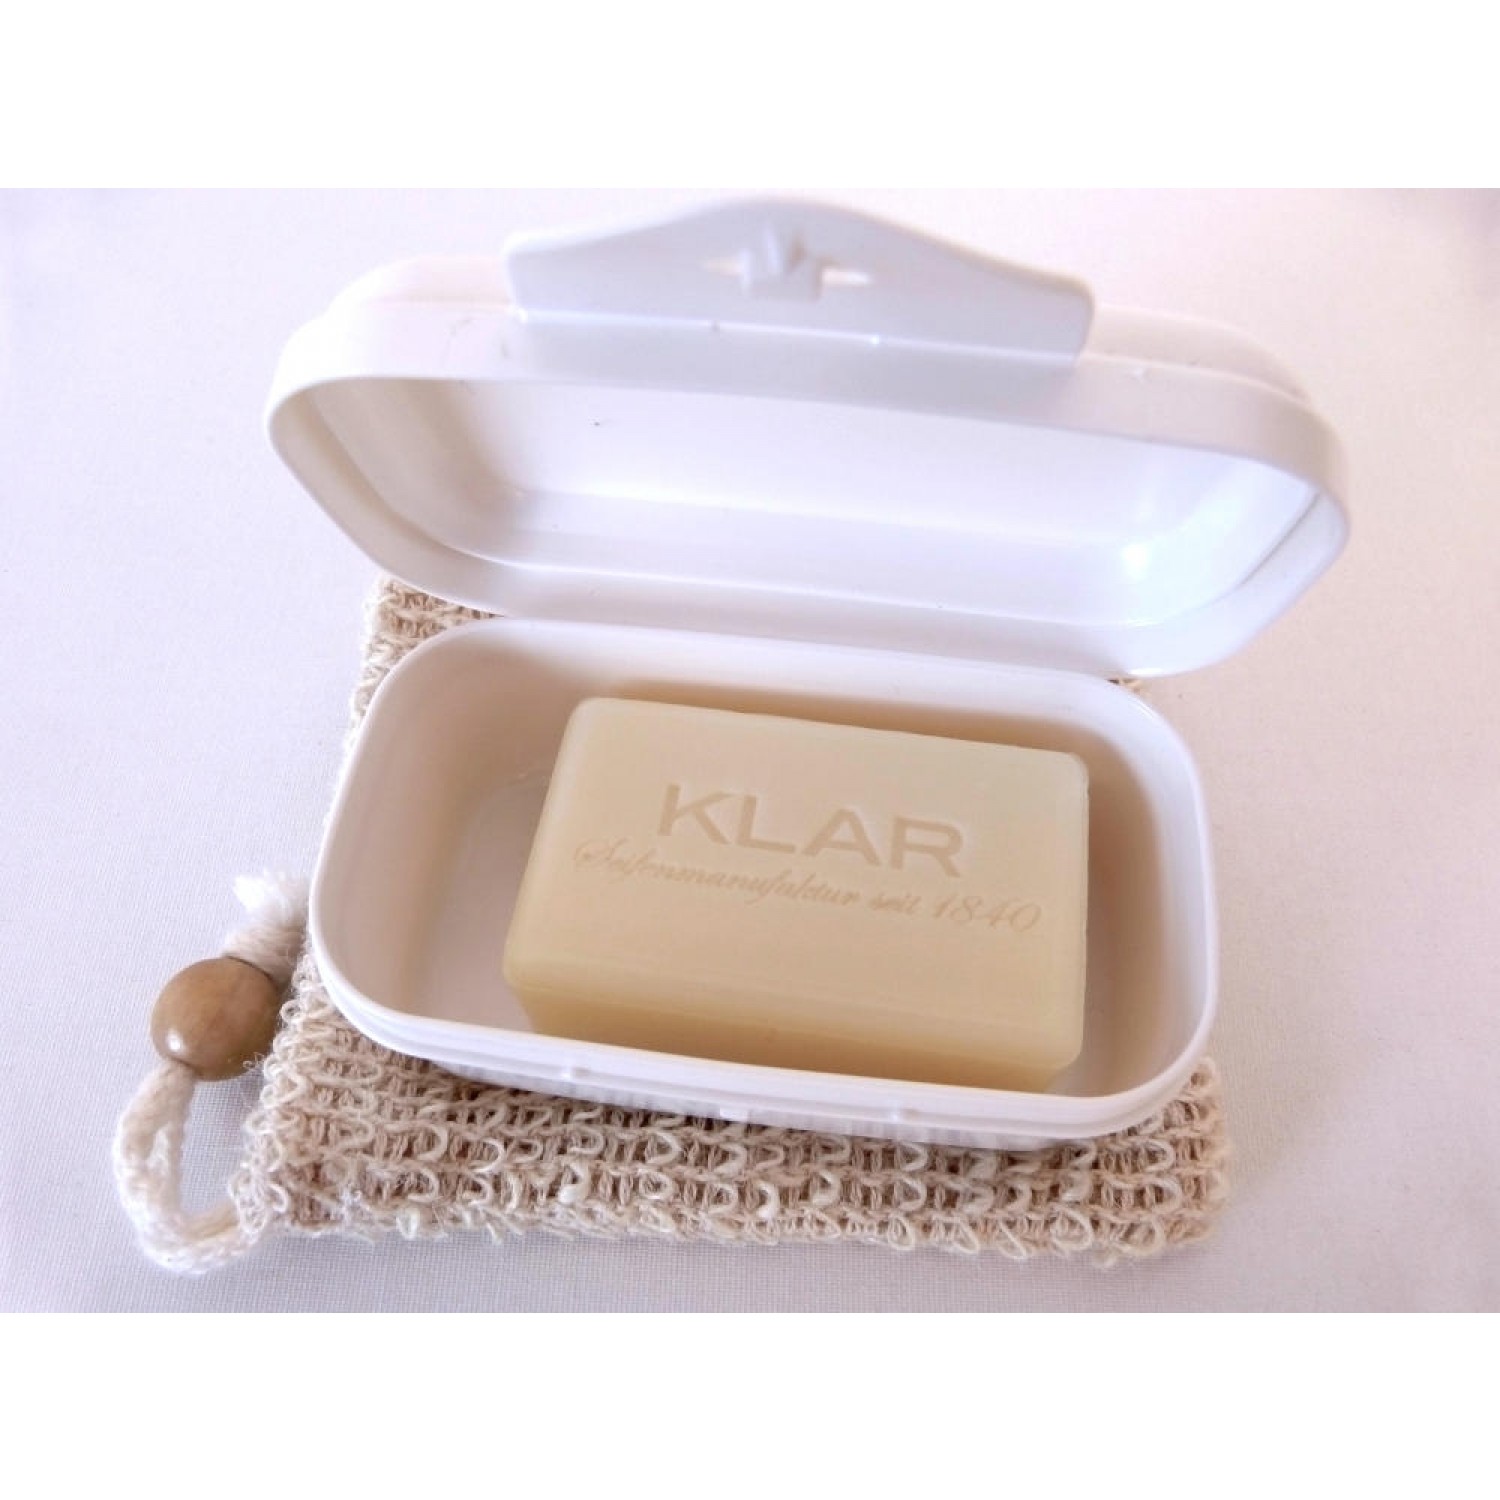 Sustainable Body Care Travel Set with vegan soap